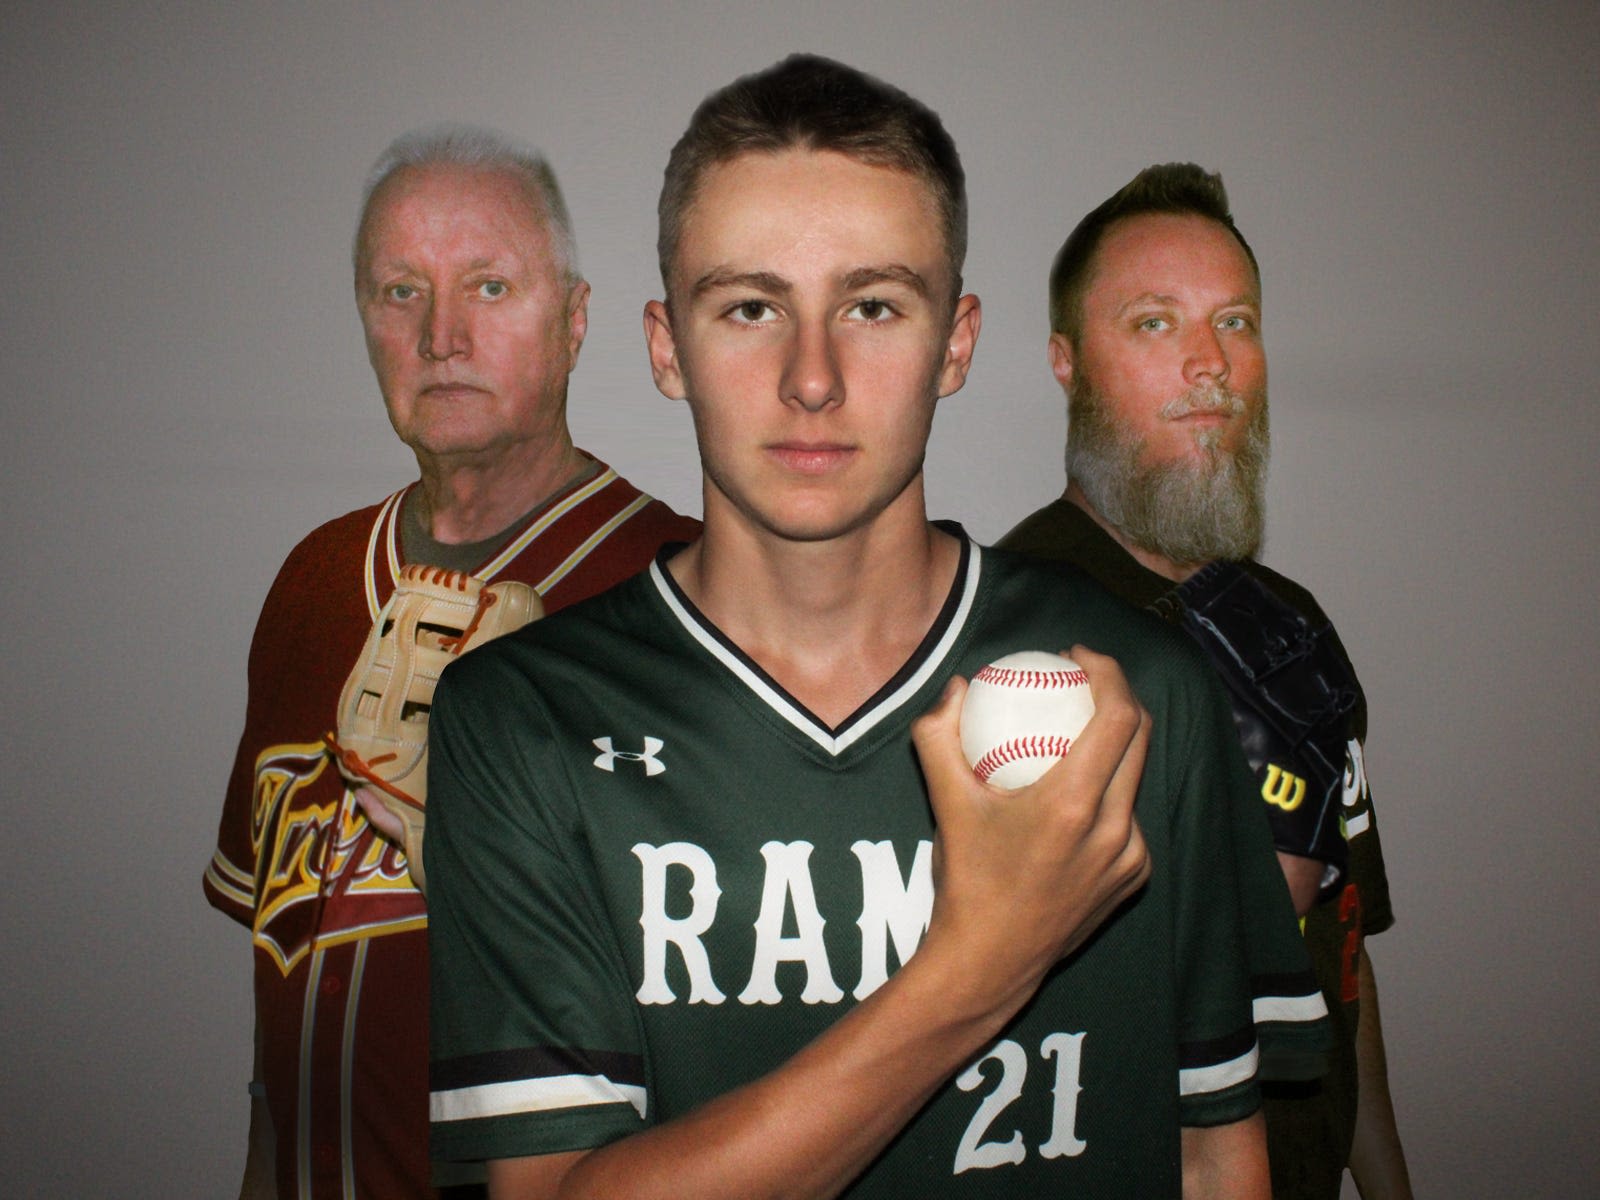 Ryder Olson pitching in at Pennridge, just like dad, grandfather did for USC baseball